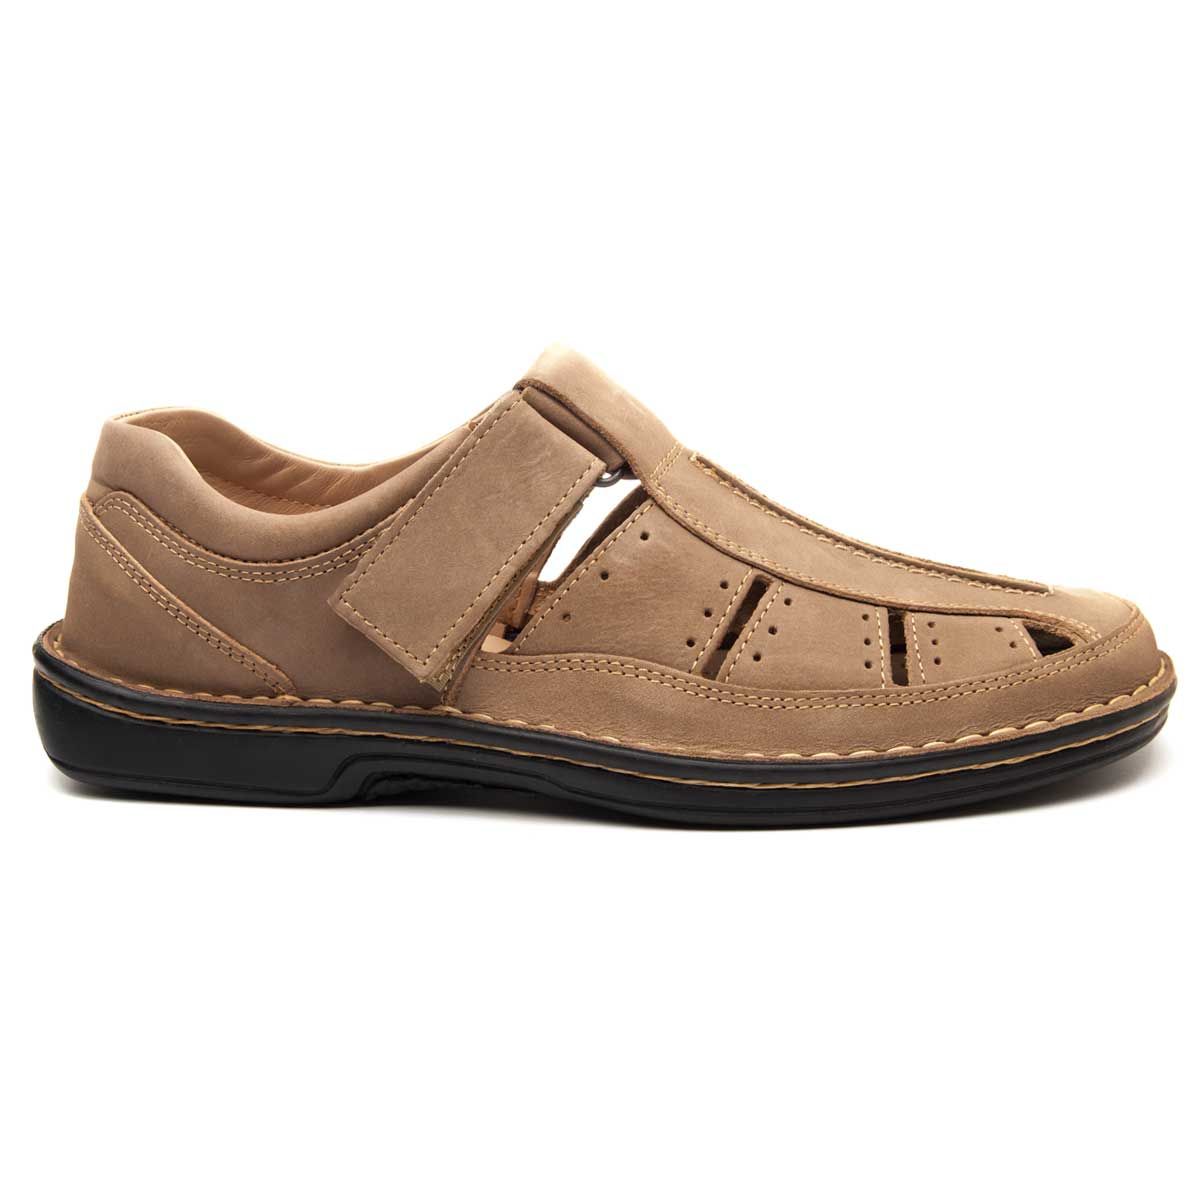 We present this ideal sandal for summer, because thanks to its flexibility and the smoothness of your skin, it is the perfect shoe so that your foot can feel especially comfortable. It is manufactured in natural skin of first quality, very soft and easy to clean and care. The floor is flexible rubber and non-slip, it also has a relief on the sole that favors comfort and grip. It has a very comfortable and adaptable to the foot. Made in Spain in a traditional way and without chrome 6. No doubt the perfect choice for our day by day.